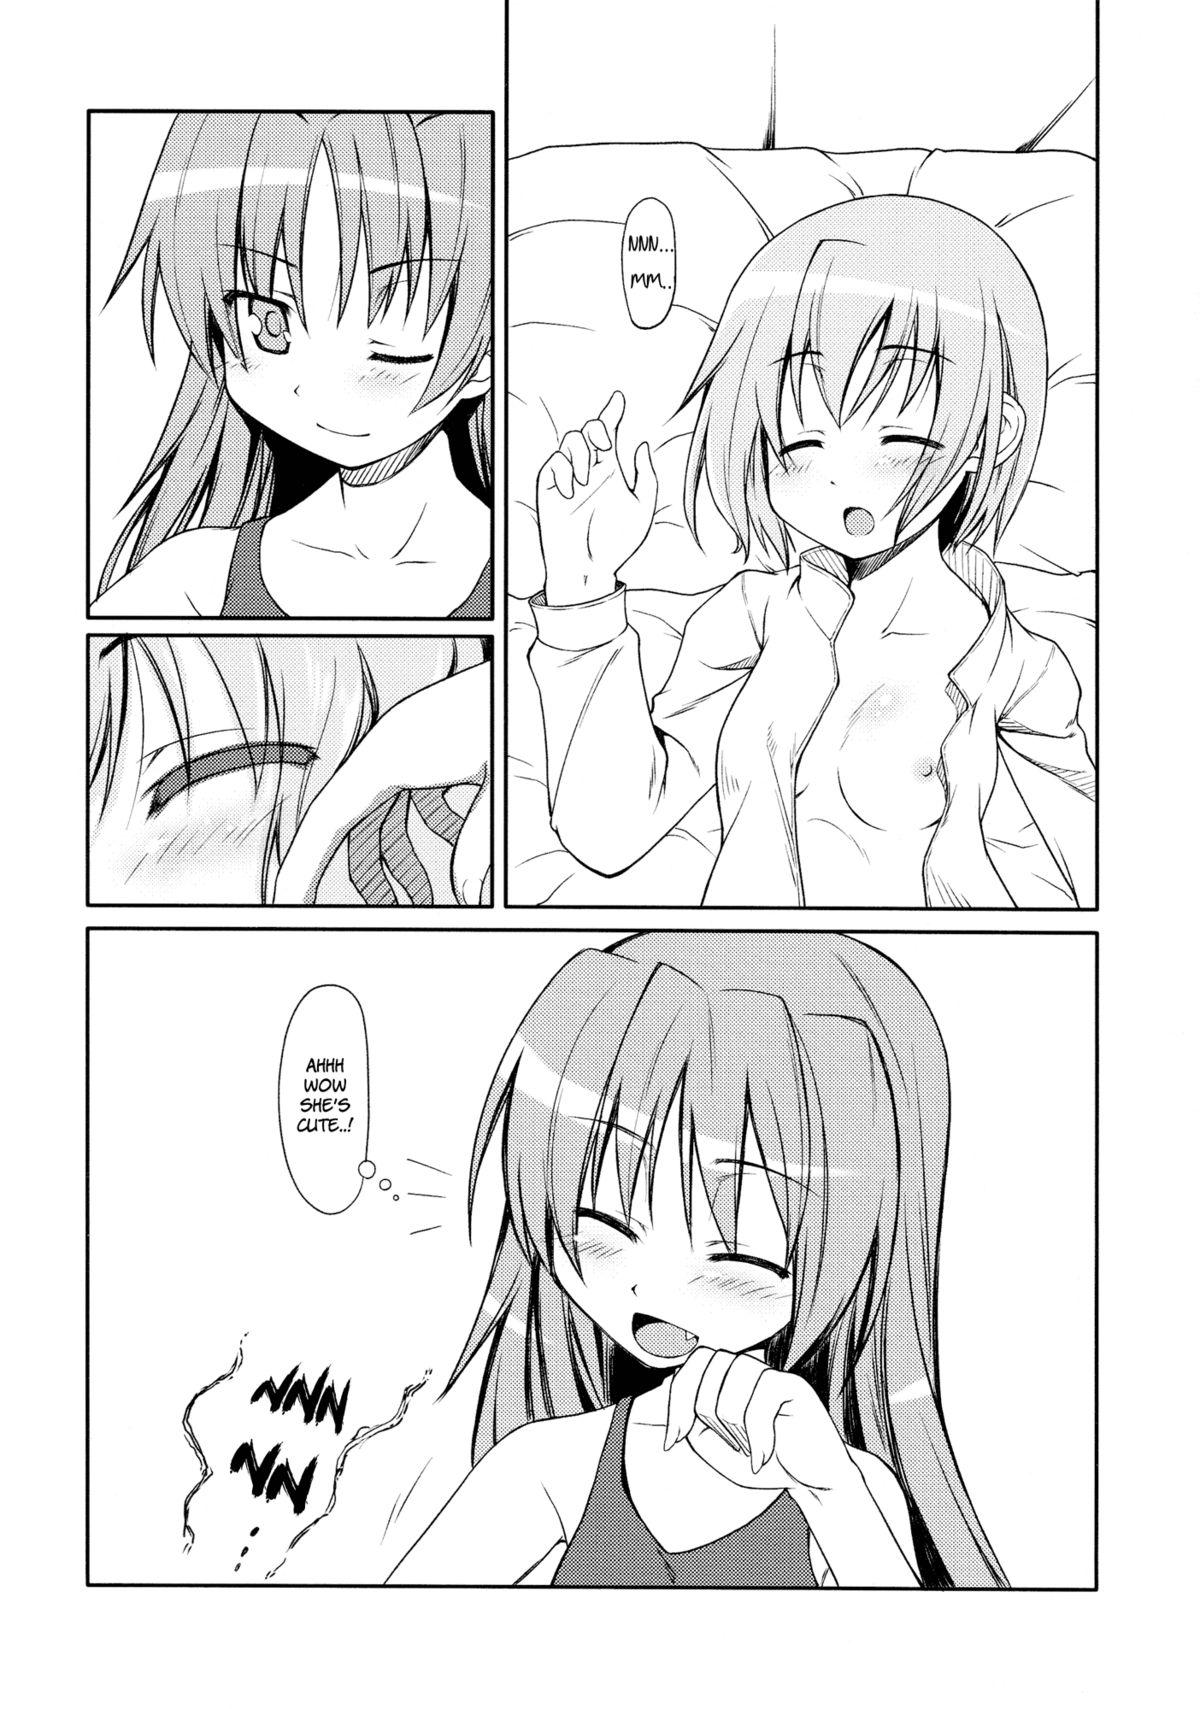 Alone Girls fall in love through her ears - Puella magi madoka magica People Having Sex - Page 9